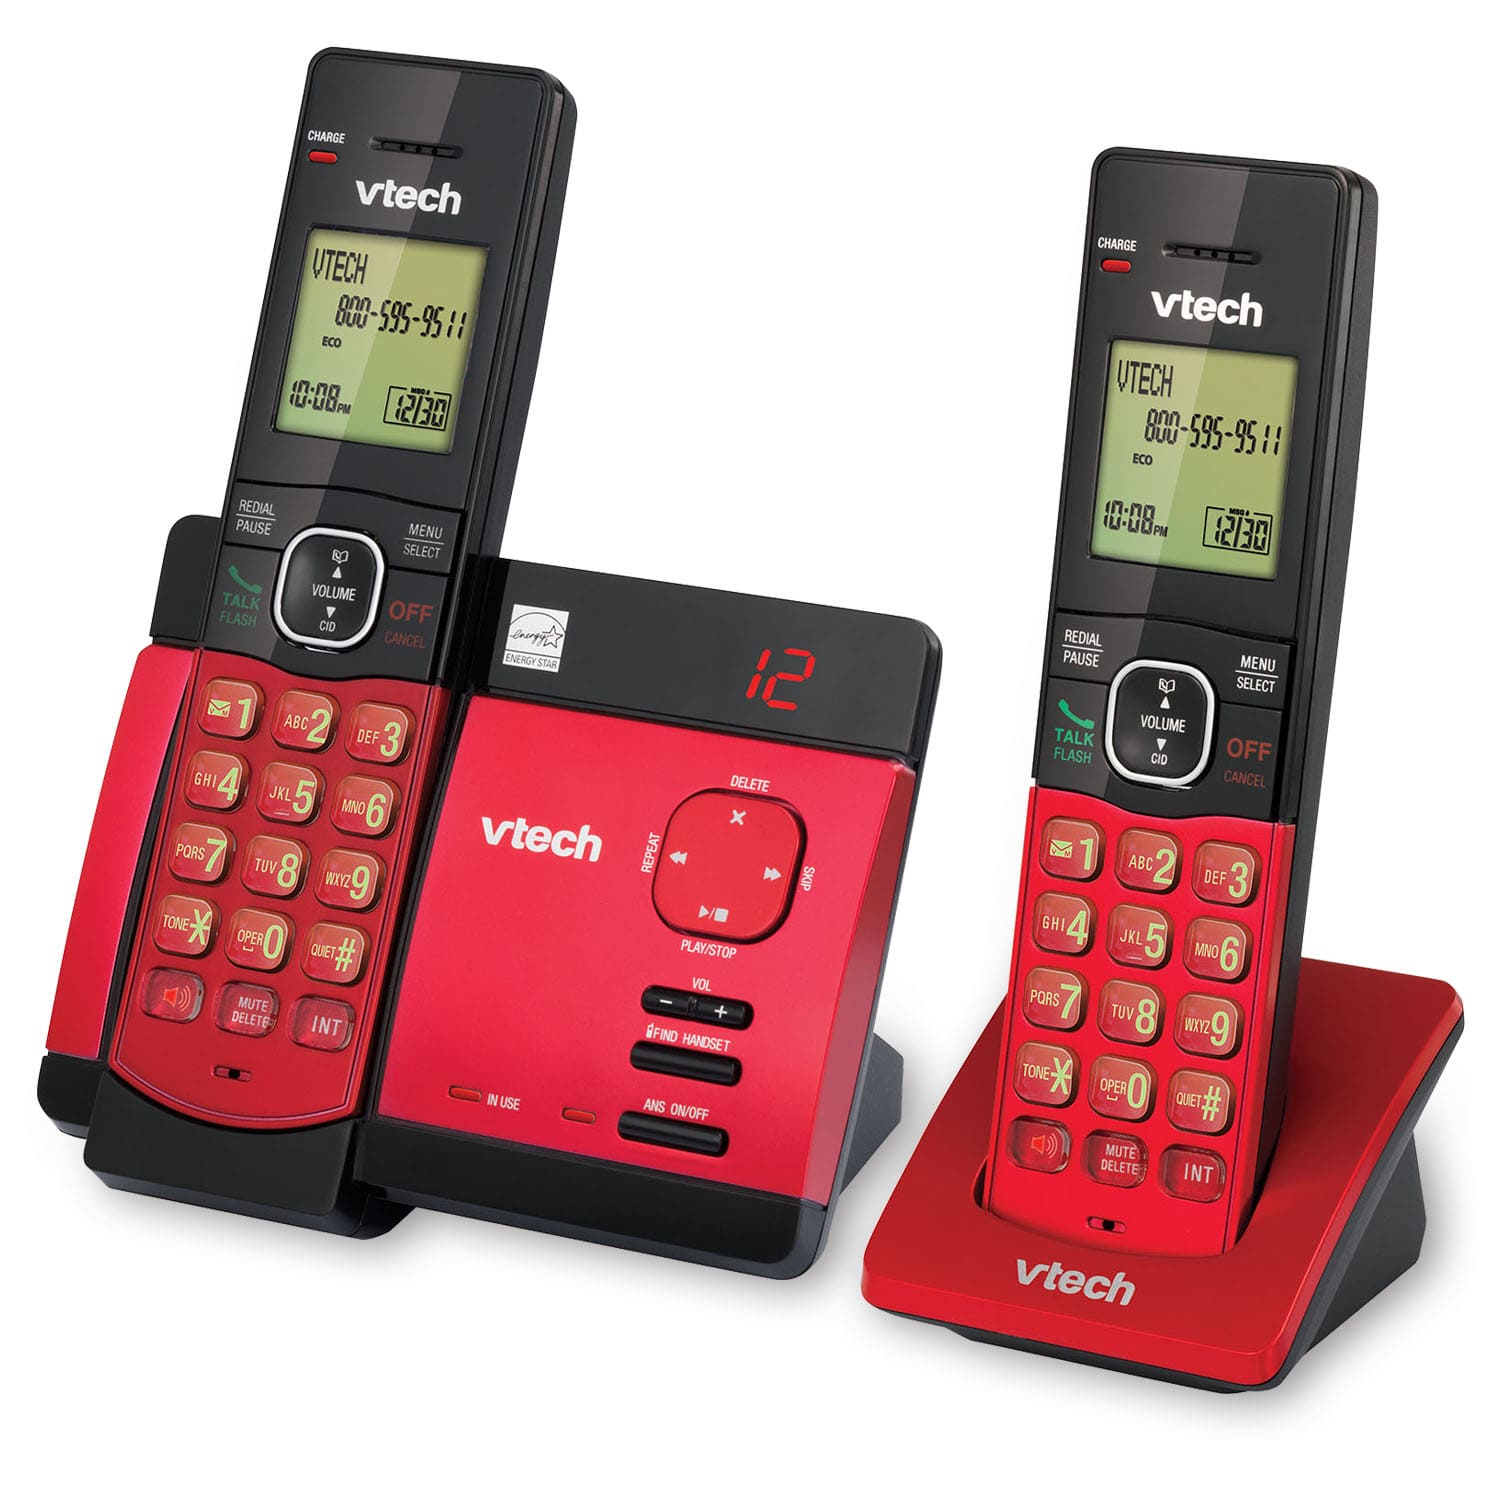 VTech CS6919-16 DECT 6.0 Cordless Phone with Caller ID/Call Waiting Red™ 